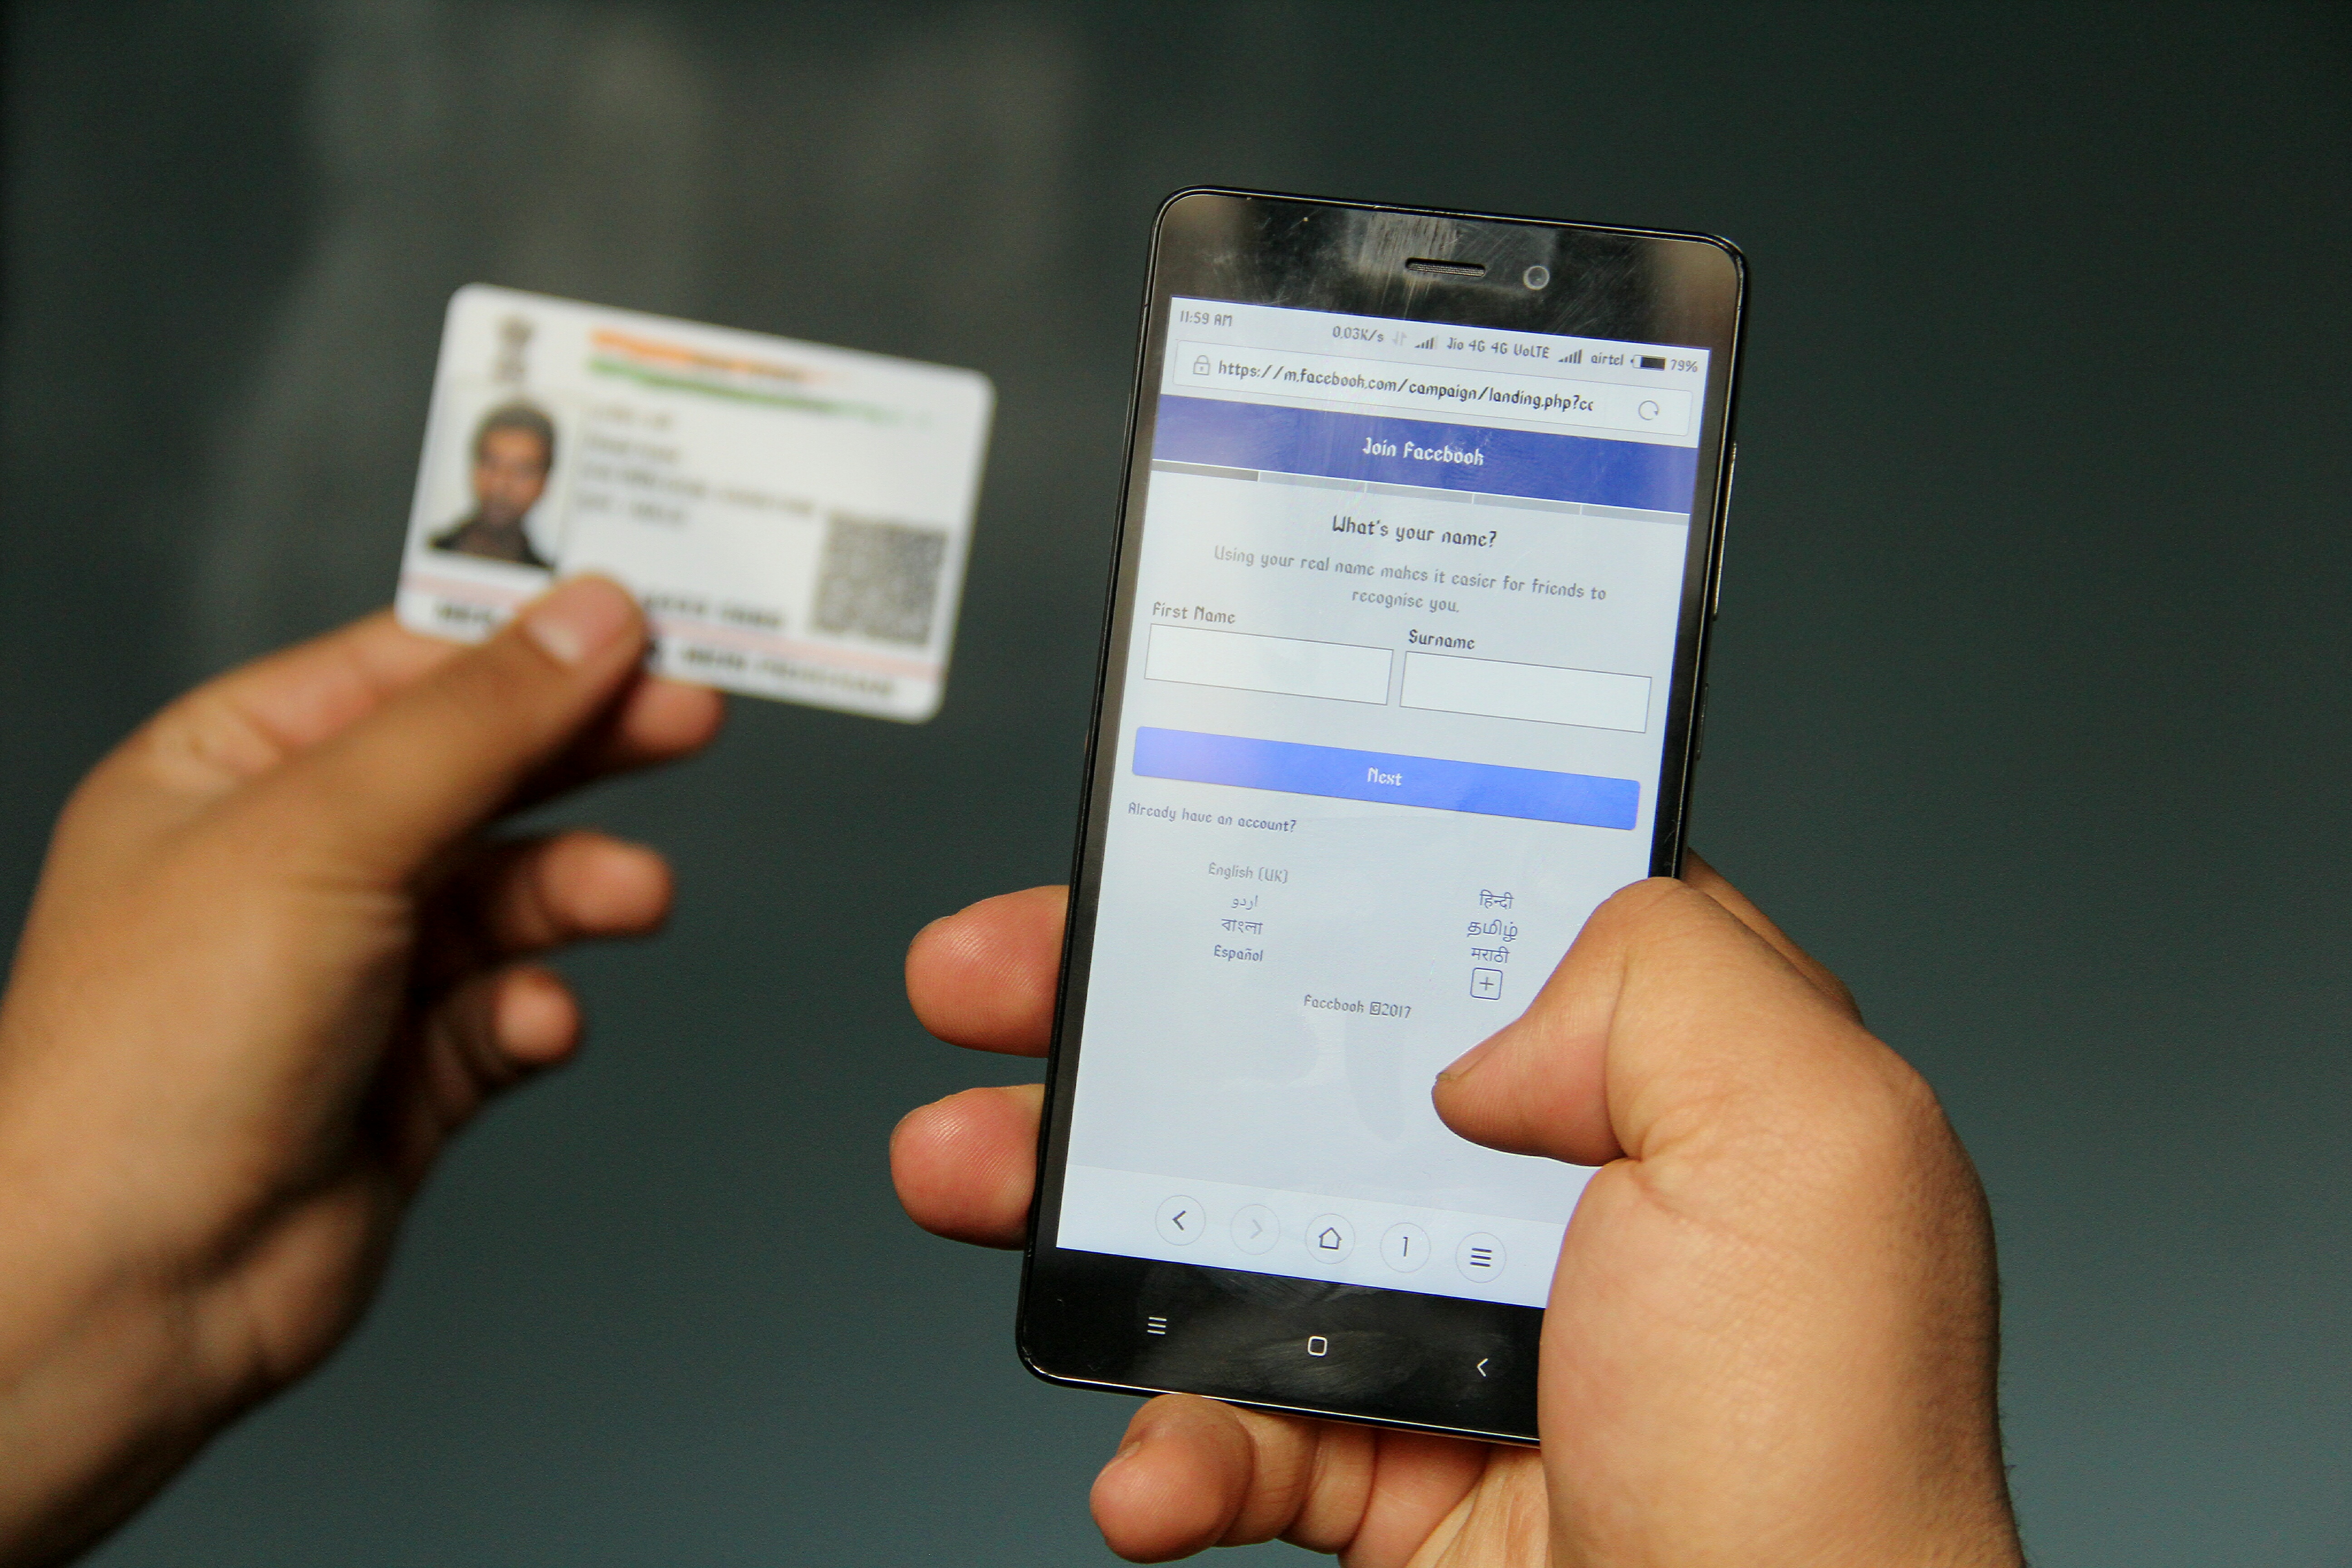 India’s national ID database is reportedly accessible for less than $10